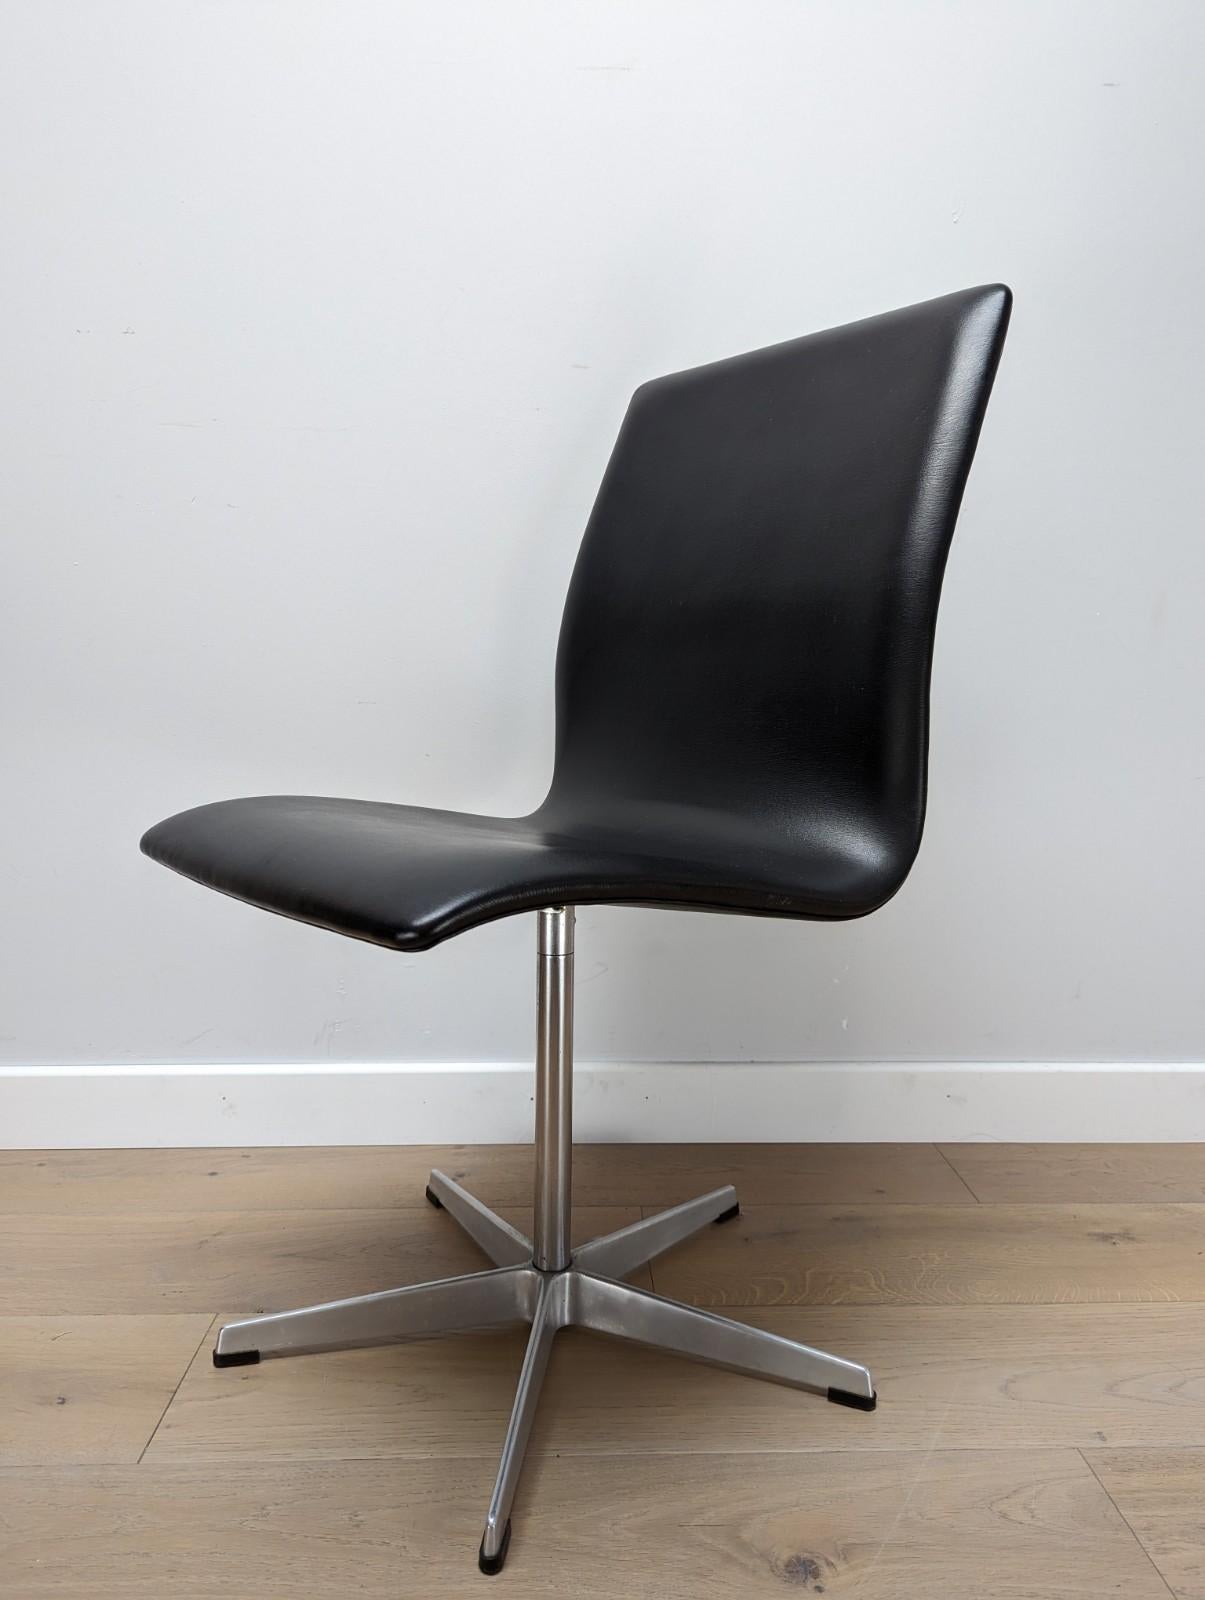 A set of 4 mid-century black Arne Jacobsen Oxford swivel dining chairs. (2 have been sold since photos were taken)

Designed by Fritz Hansen and made in Denmark by Arne Jacobsen.

Leatherette/Vinyl Seat with a chrome base and aluminium feet.

About